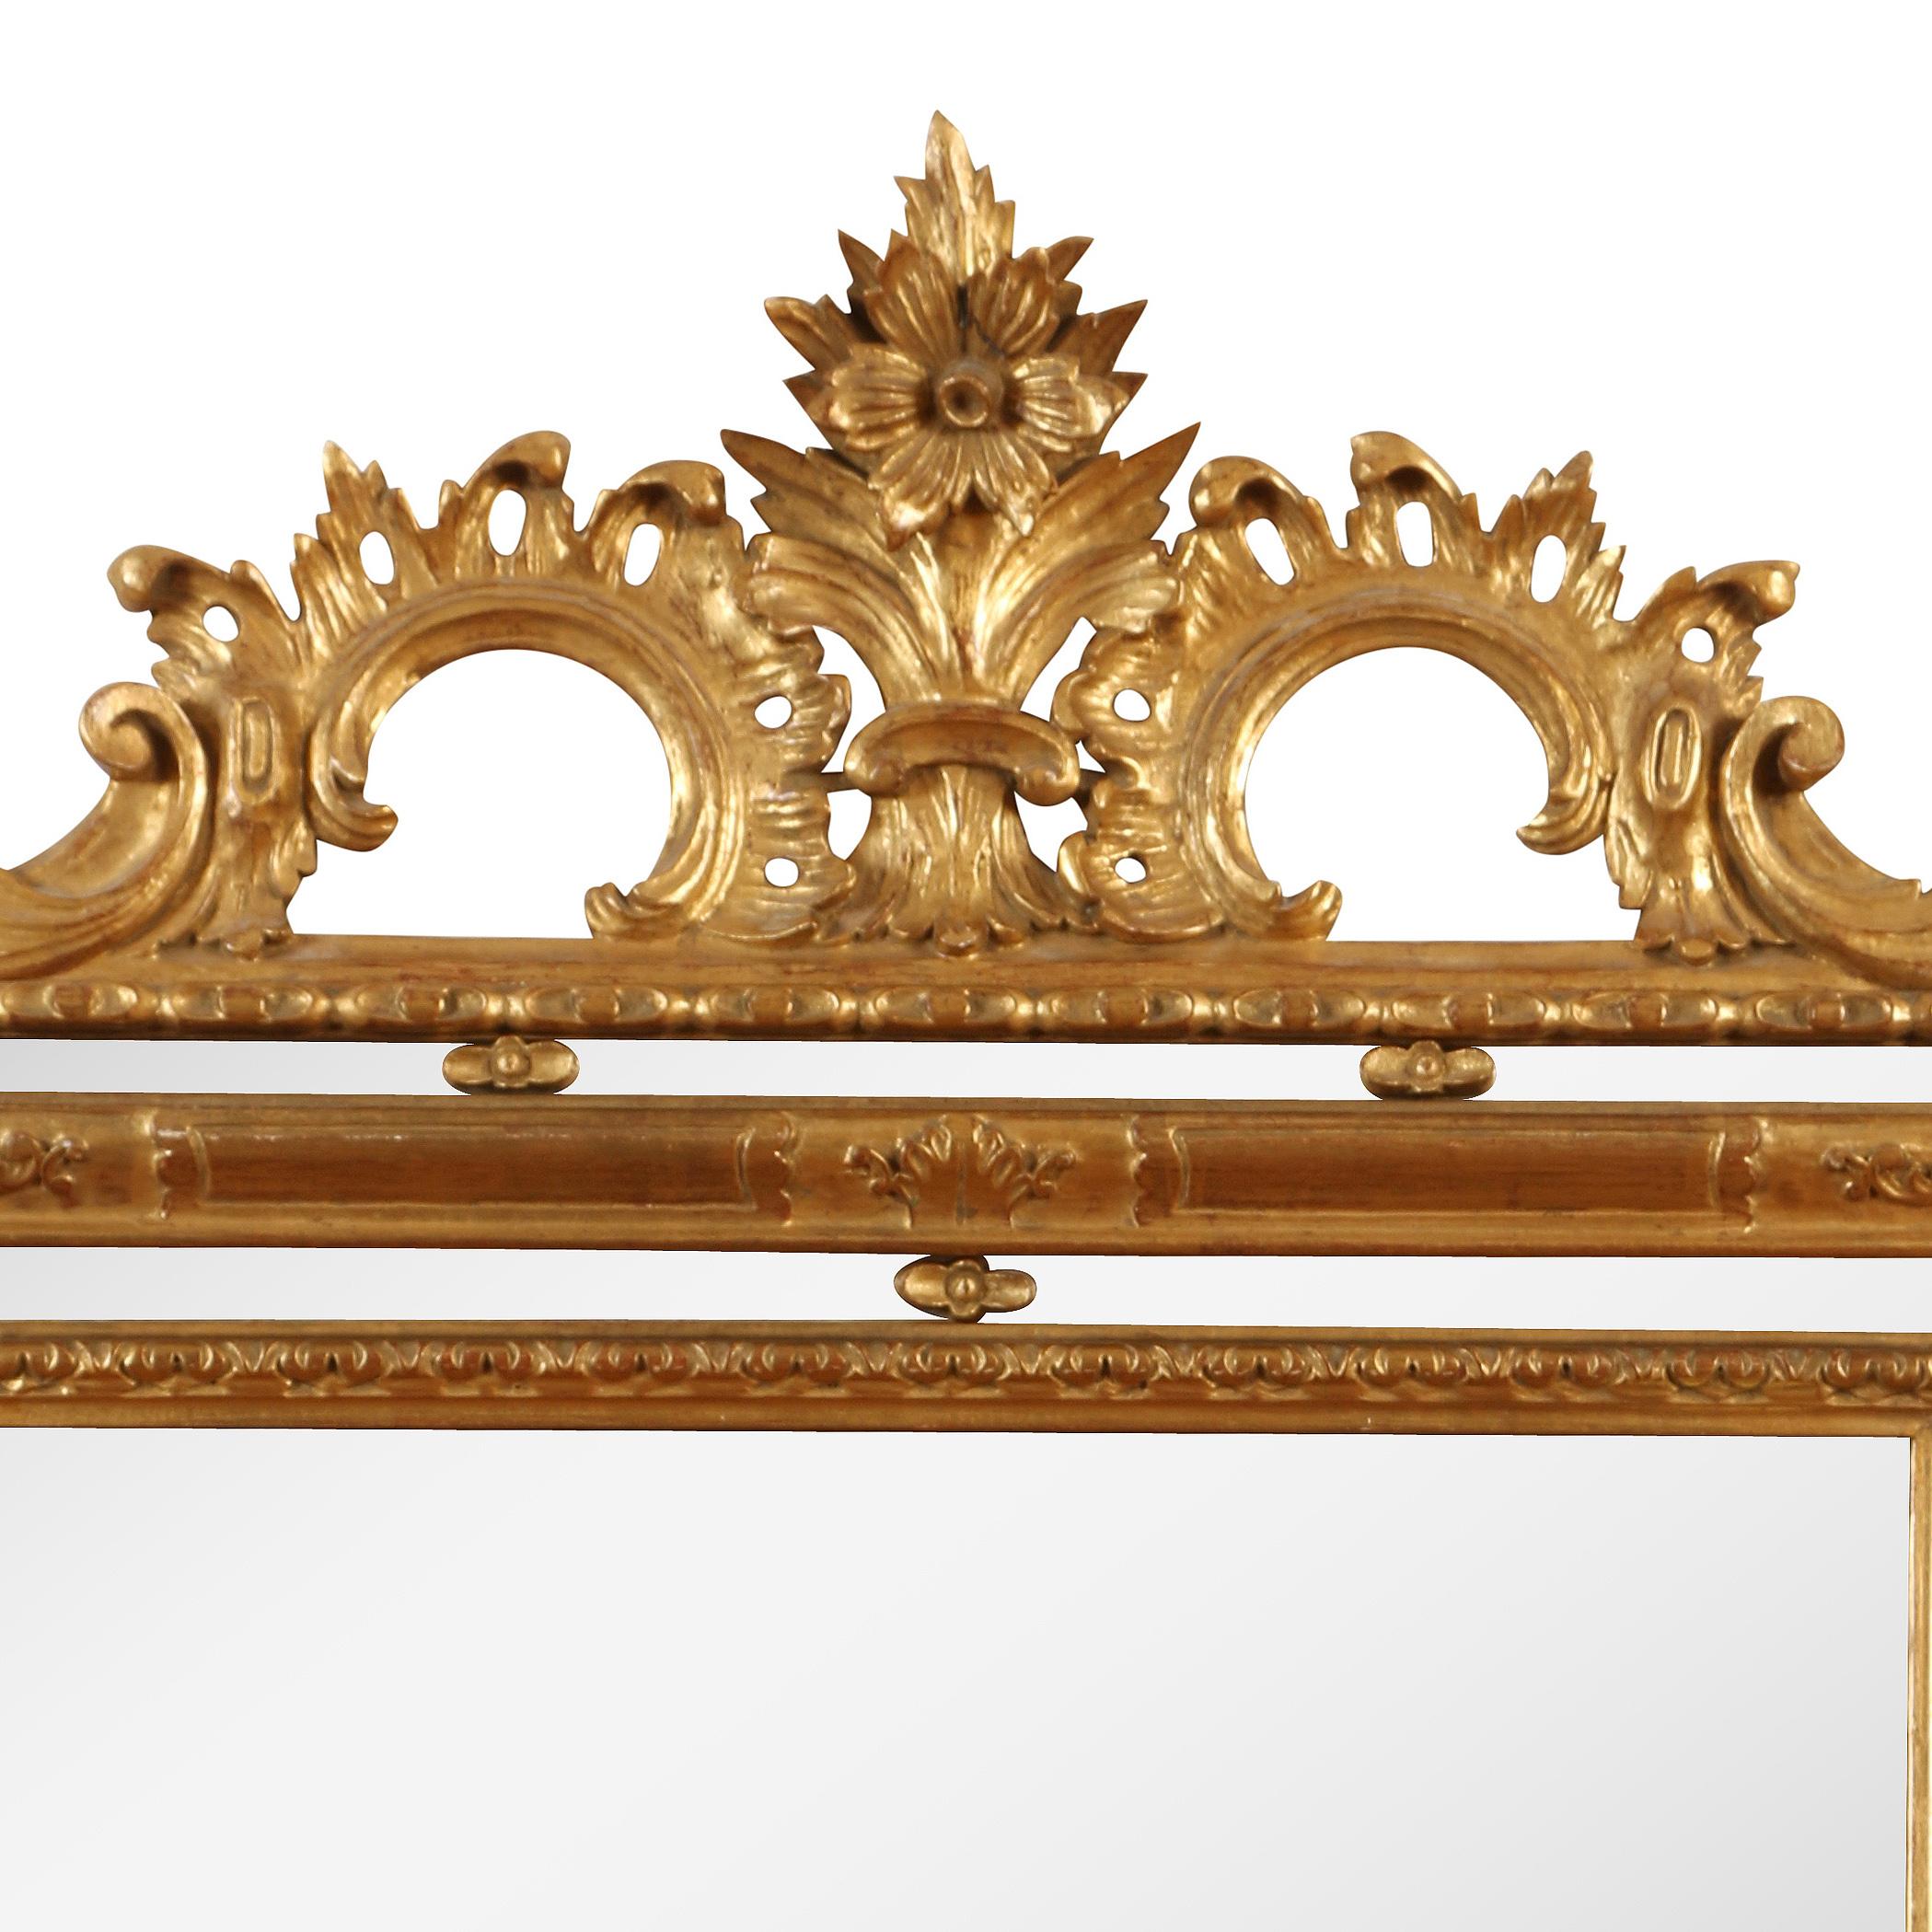 Giltwood rectangular Regence style mirror with a triple frame. Scroll and flower detail to crown.